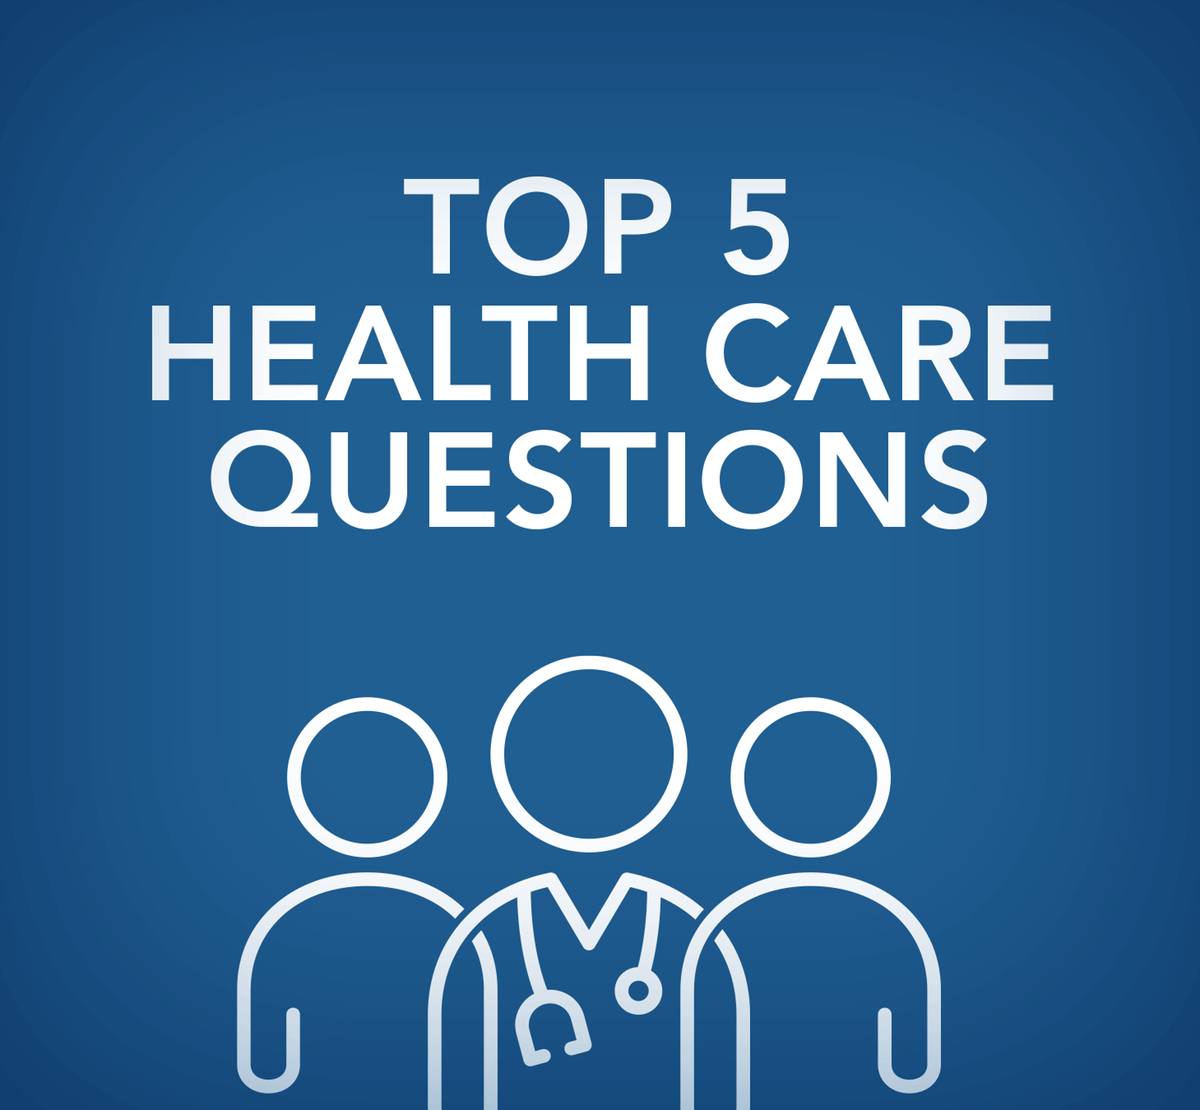 Top 5 Health Care Questions